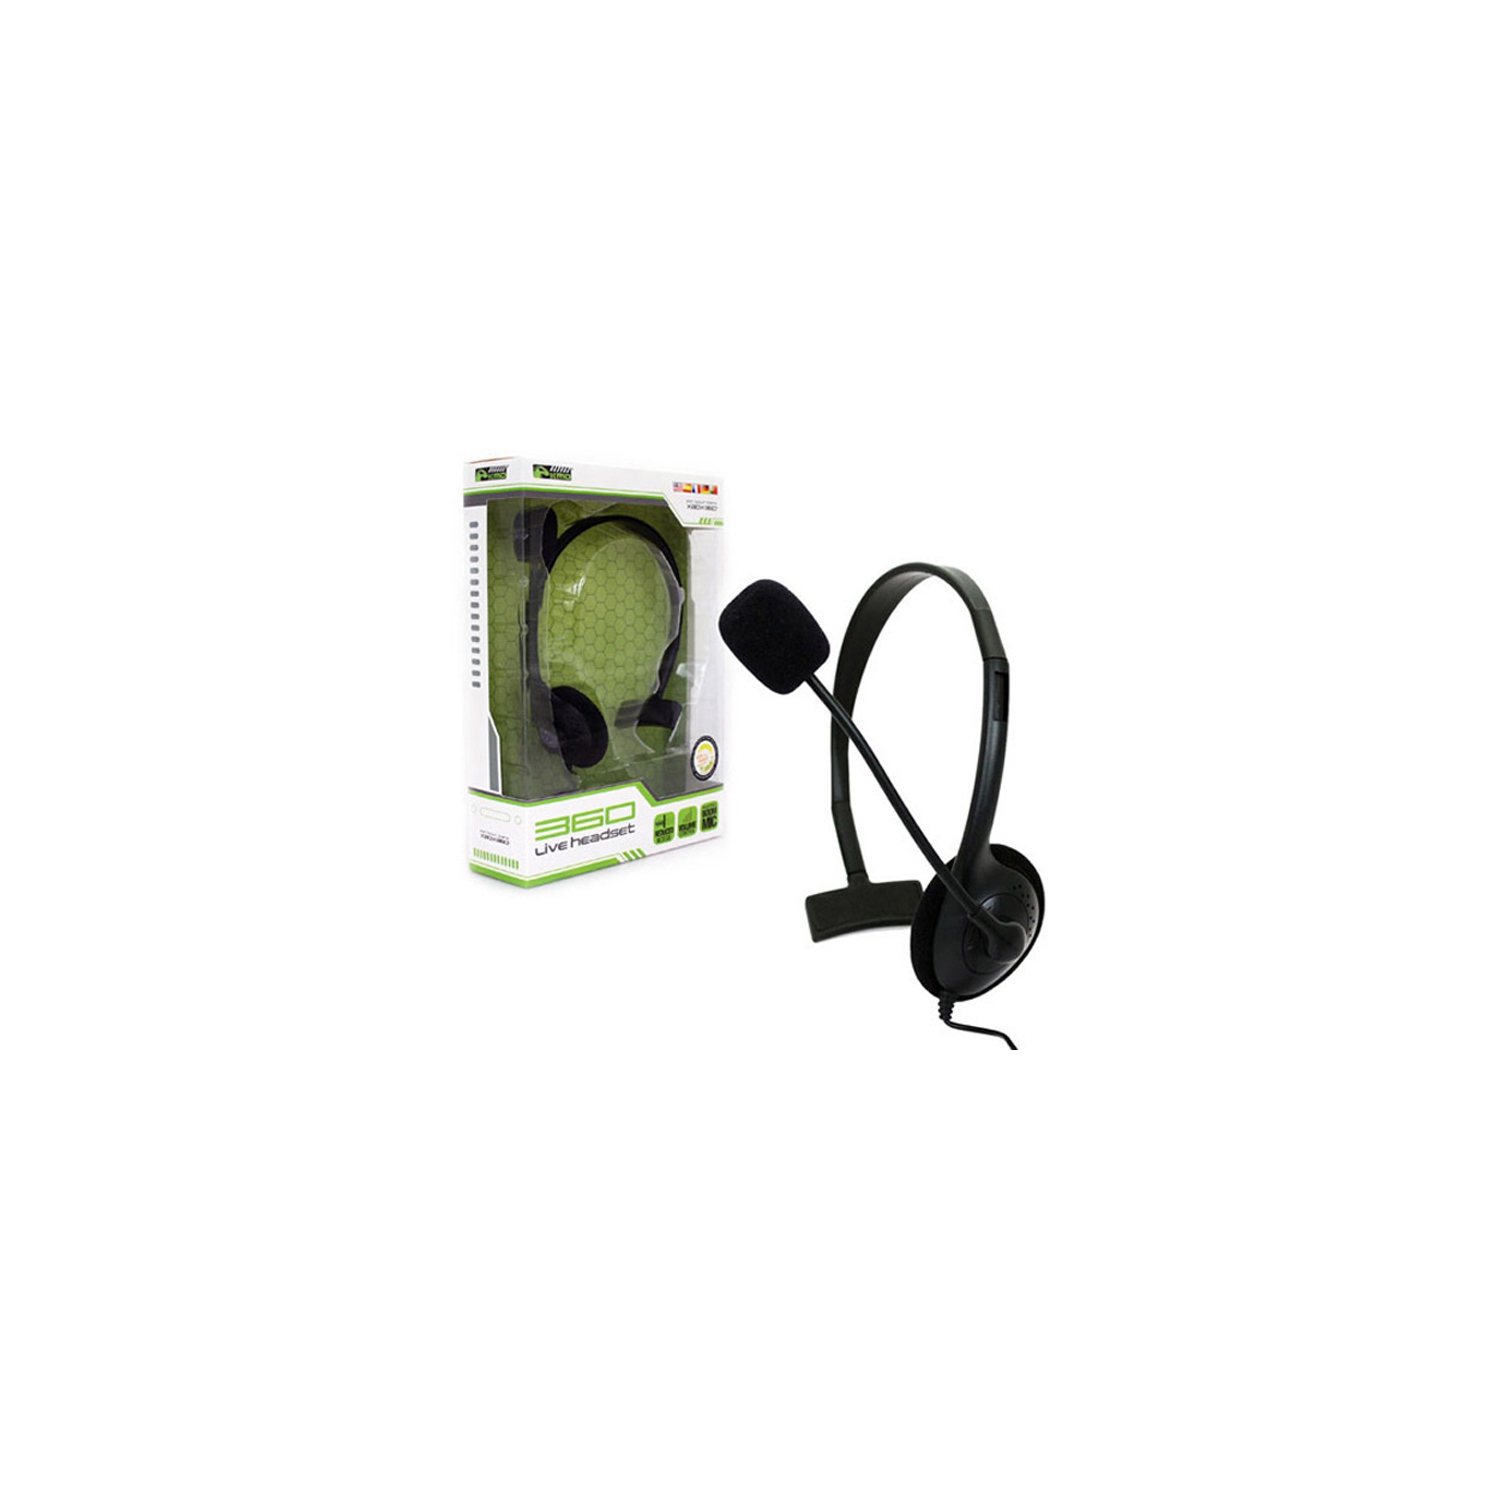 Xbox 360 Black Live Gaming Small Headset With Microphone [KMD]